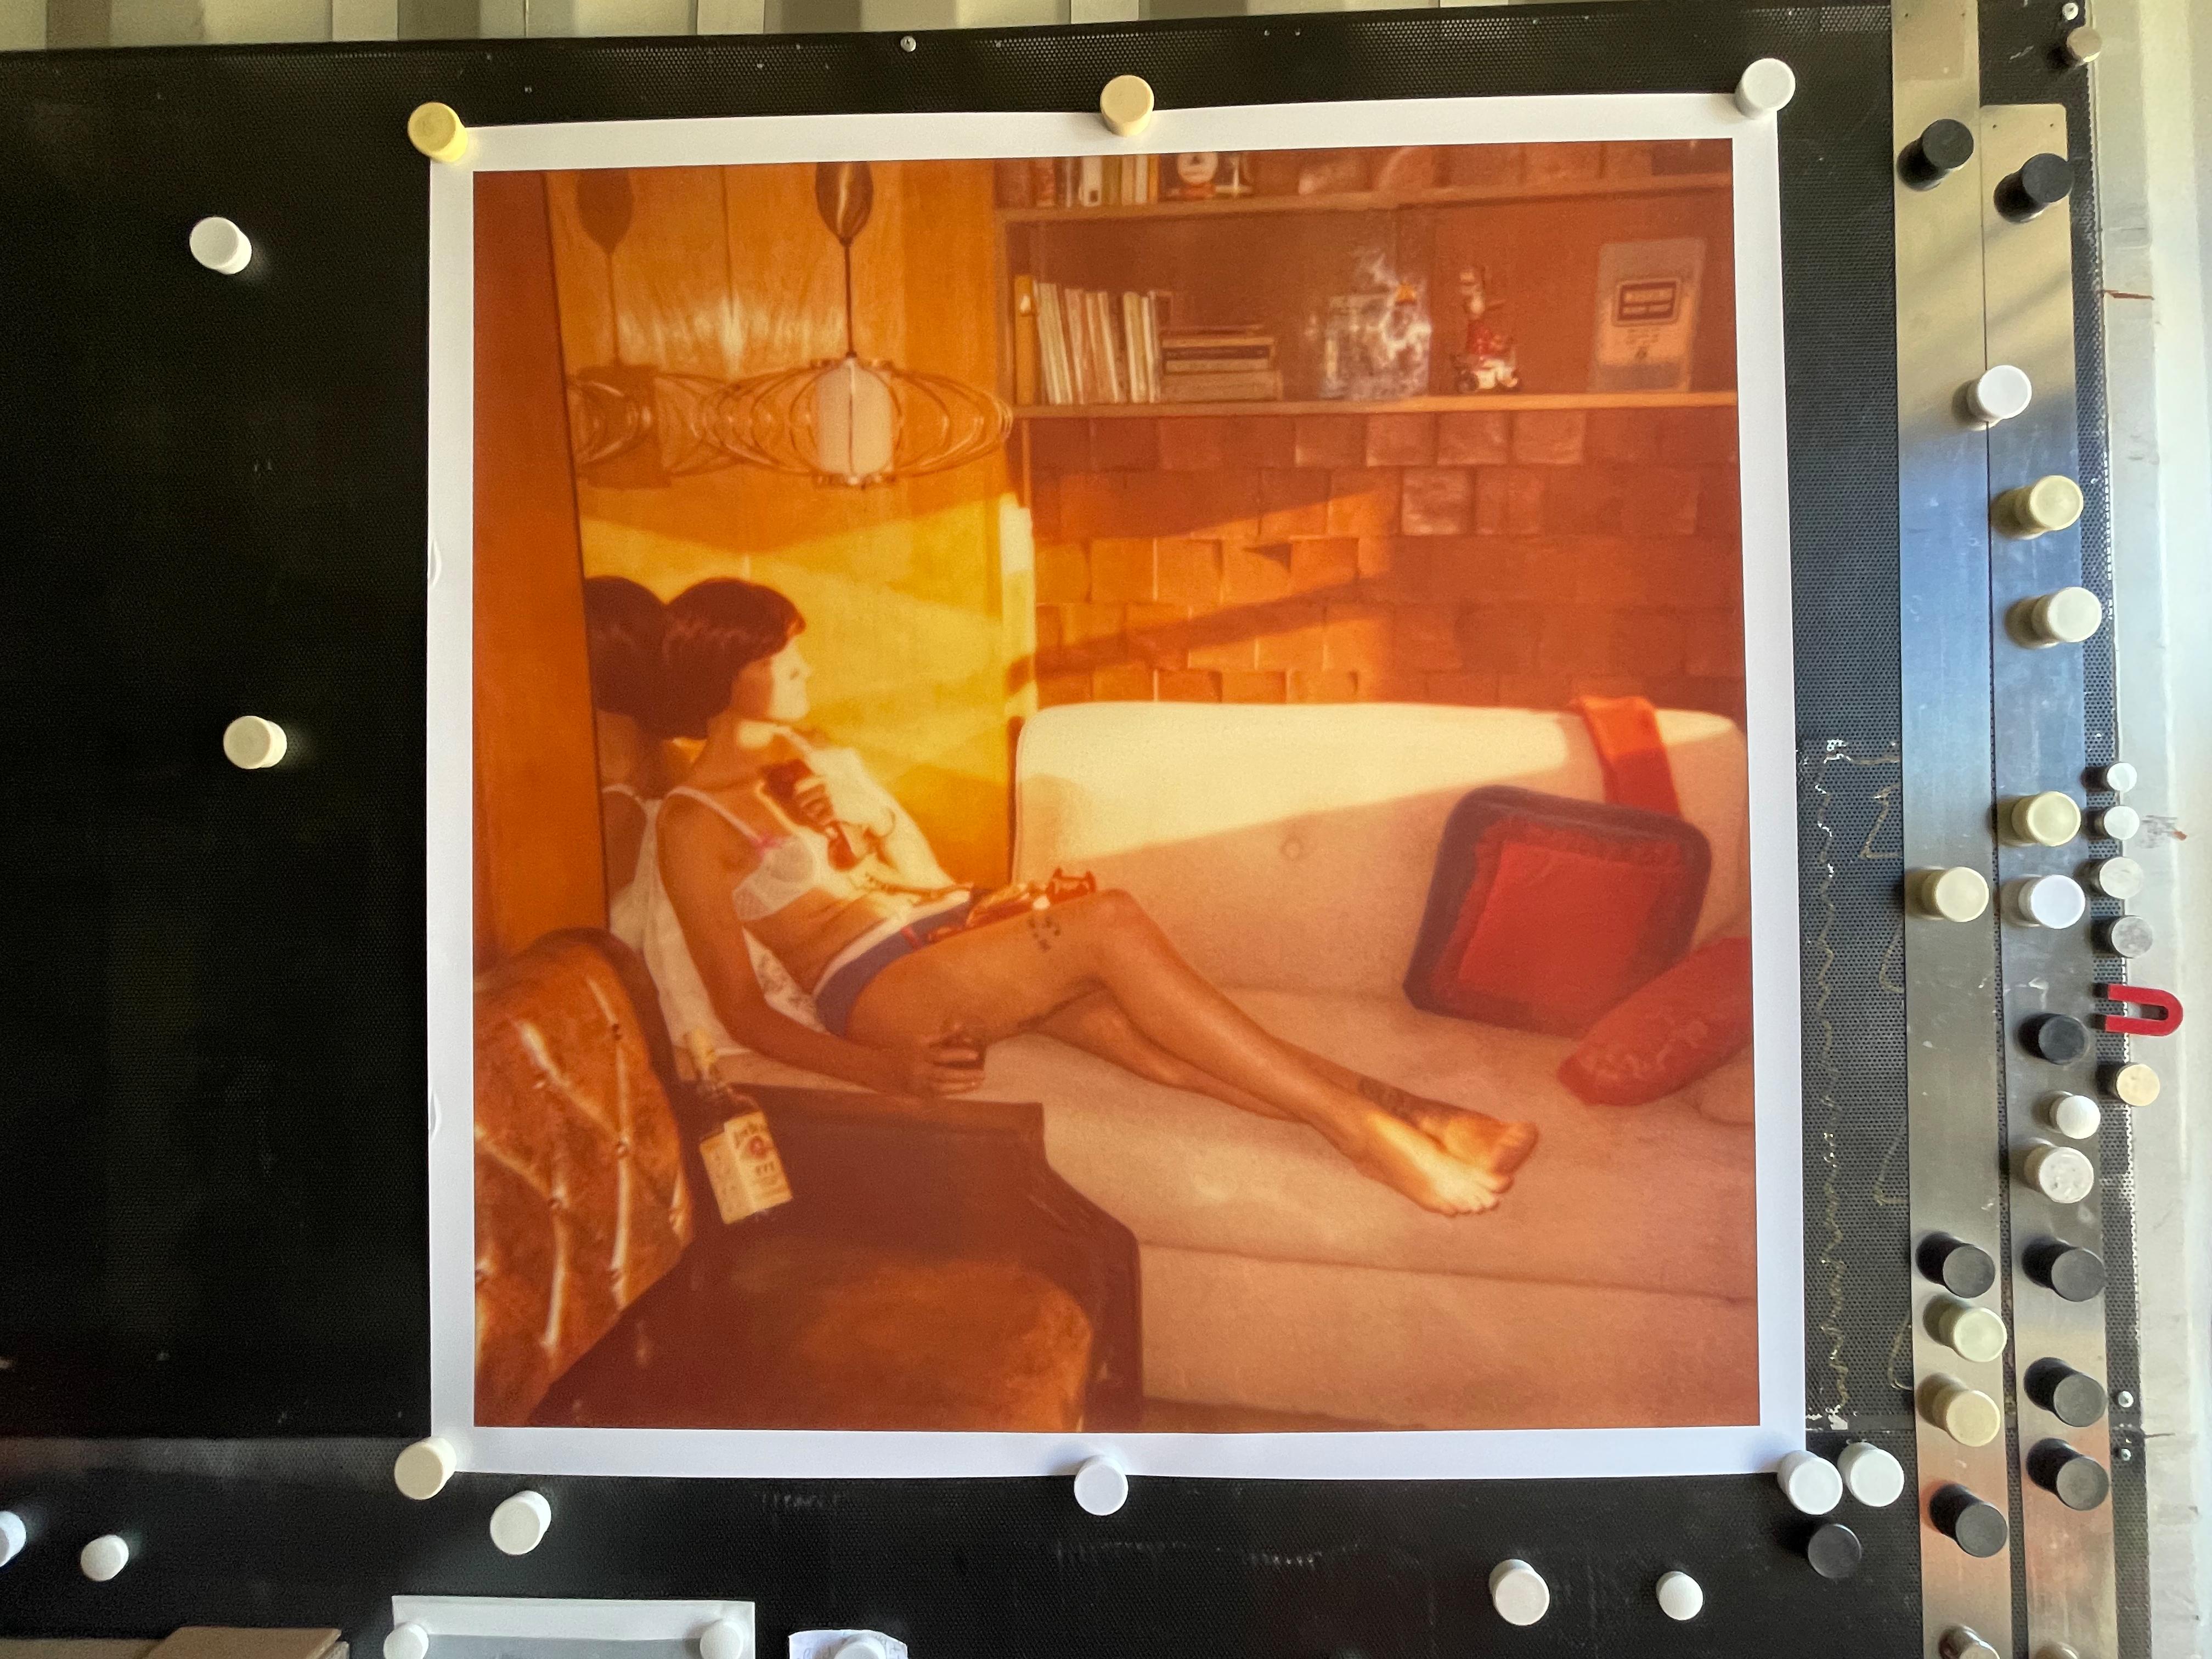 Every Single Incident Weighs Tons (The Girl Behind the White Picket Fence) - 2013

90x89cm, 
Edition of 10 plus 2 Artist Proofs. 
Archival C-Print, based on the Polaroid. 
Certificate and signature label. 
Artist Inventory # 12922. 
Not mounted.